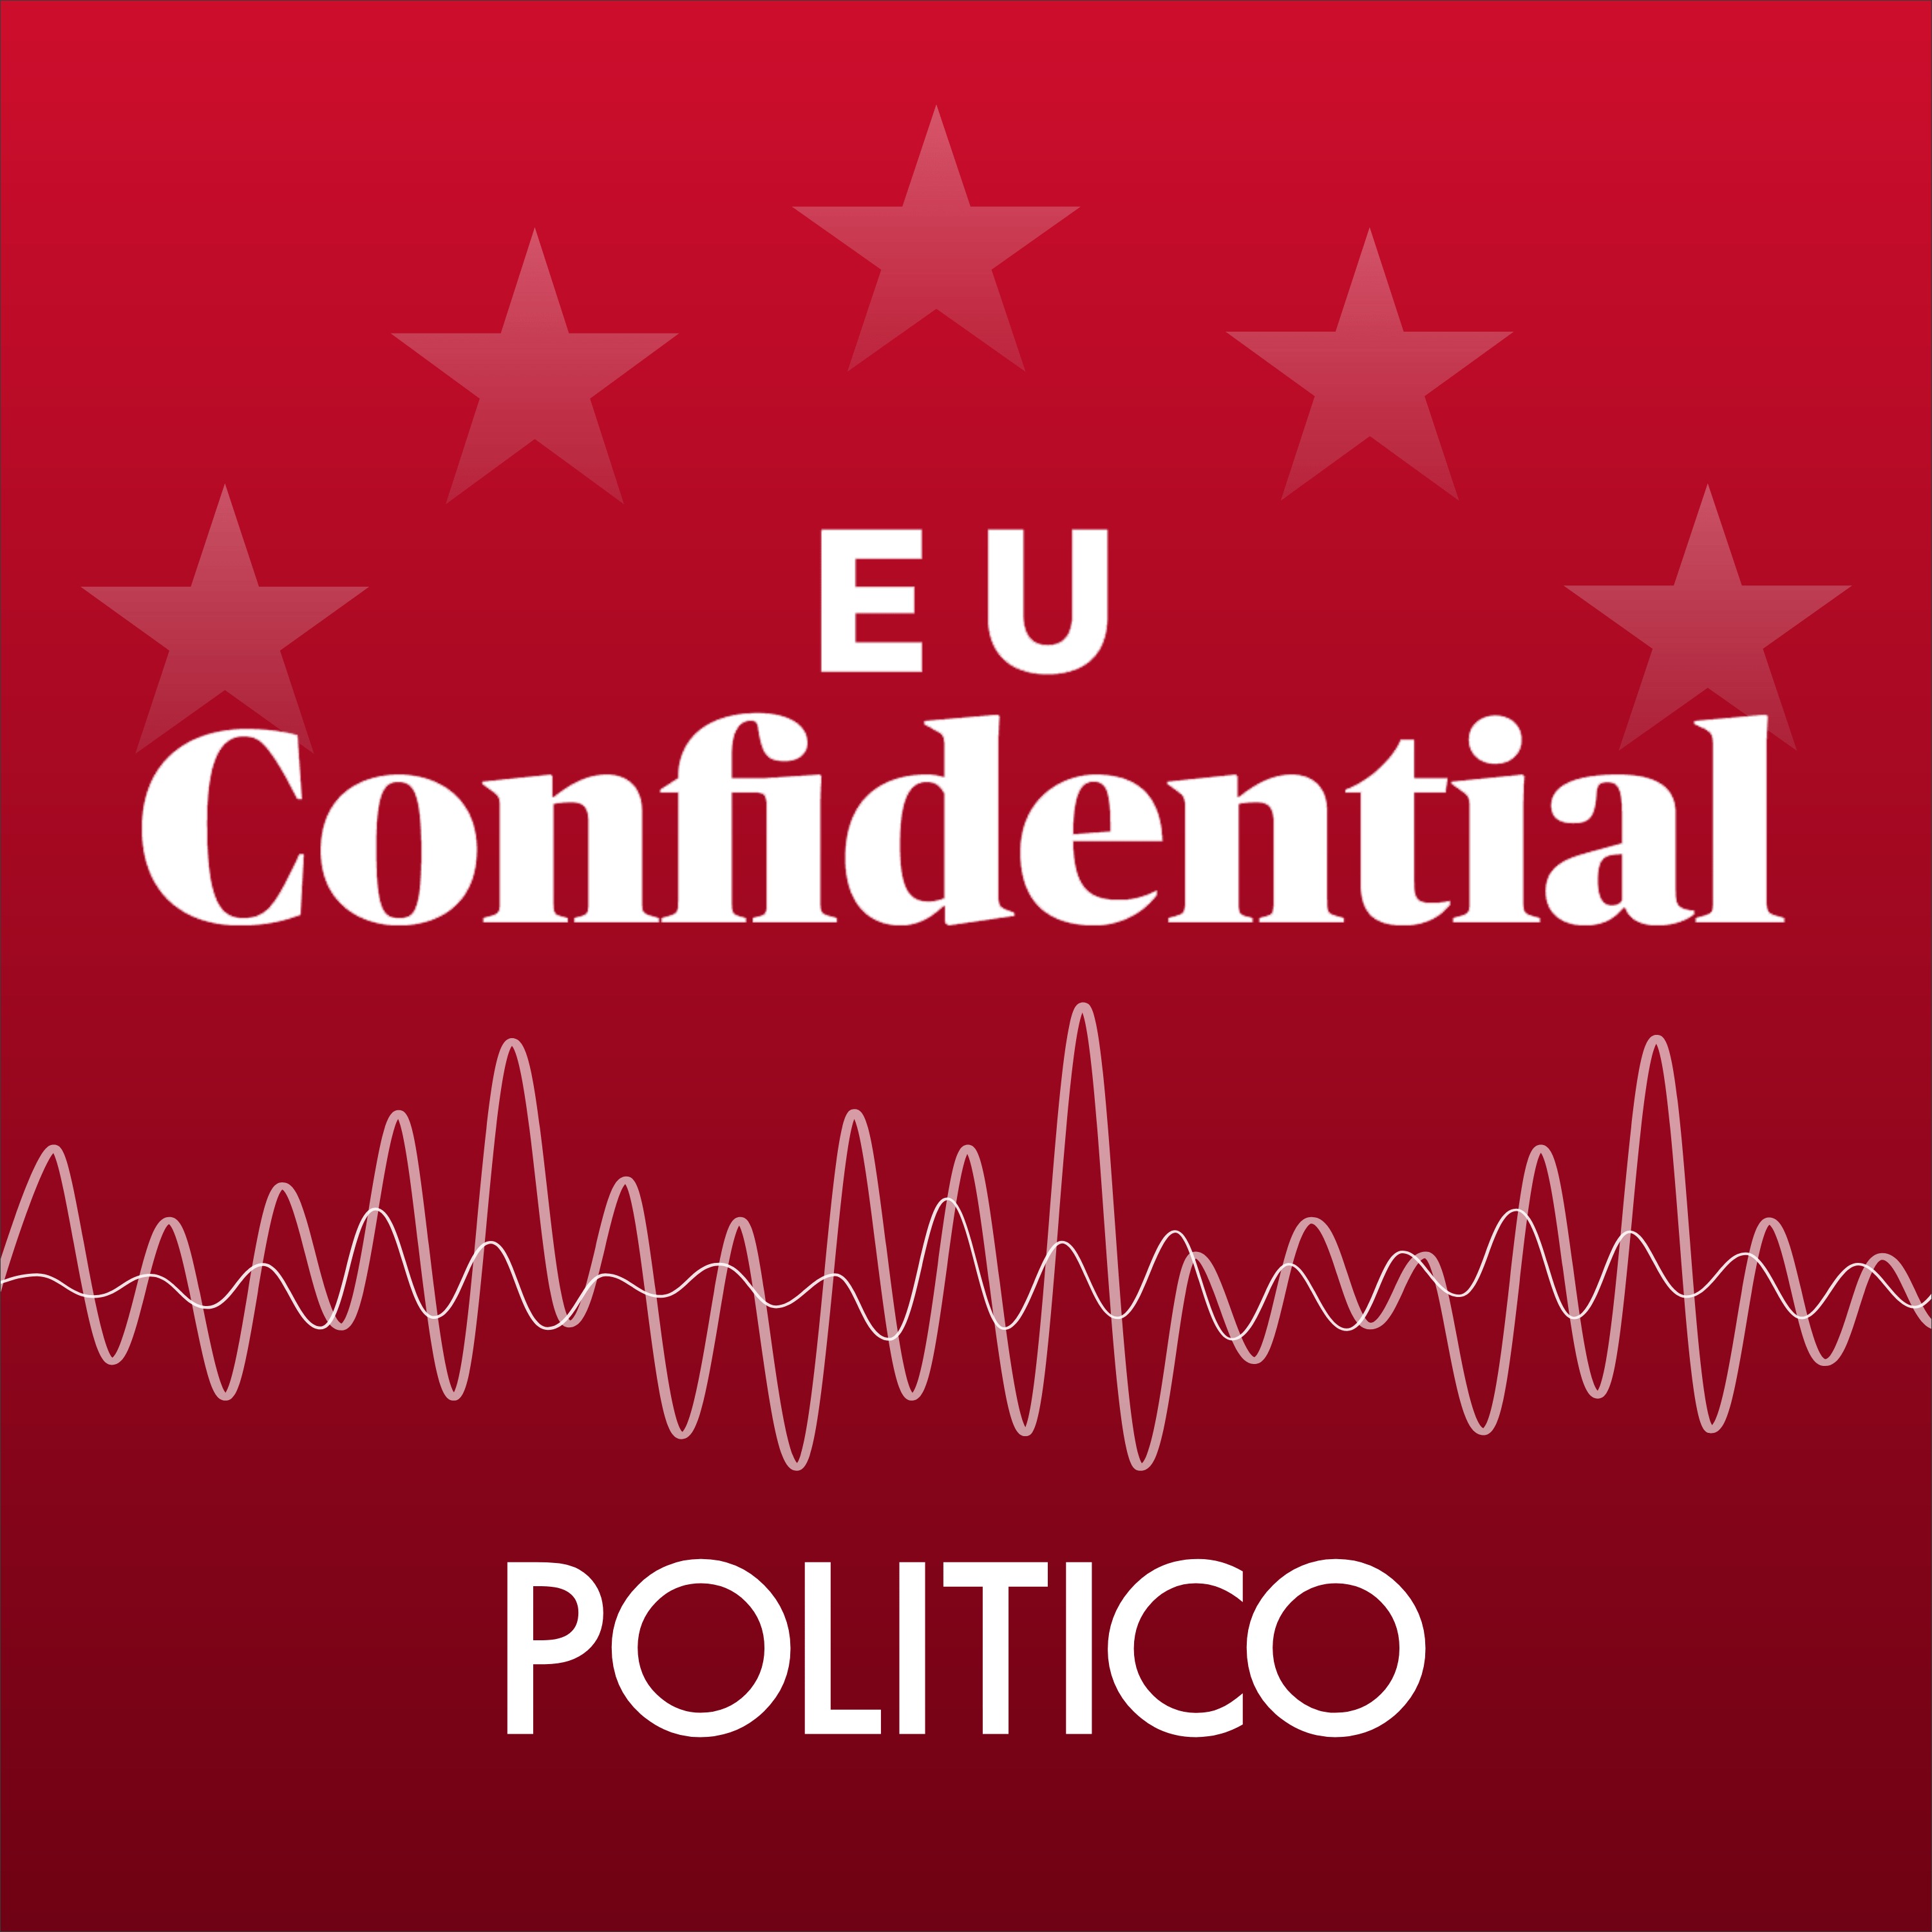 Portuguese voters' anger and what it means for Europe